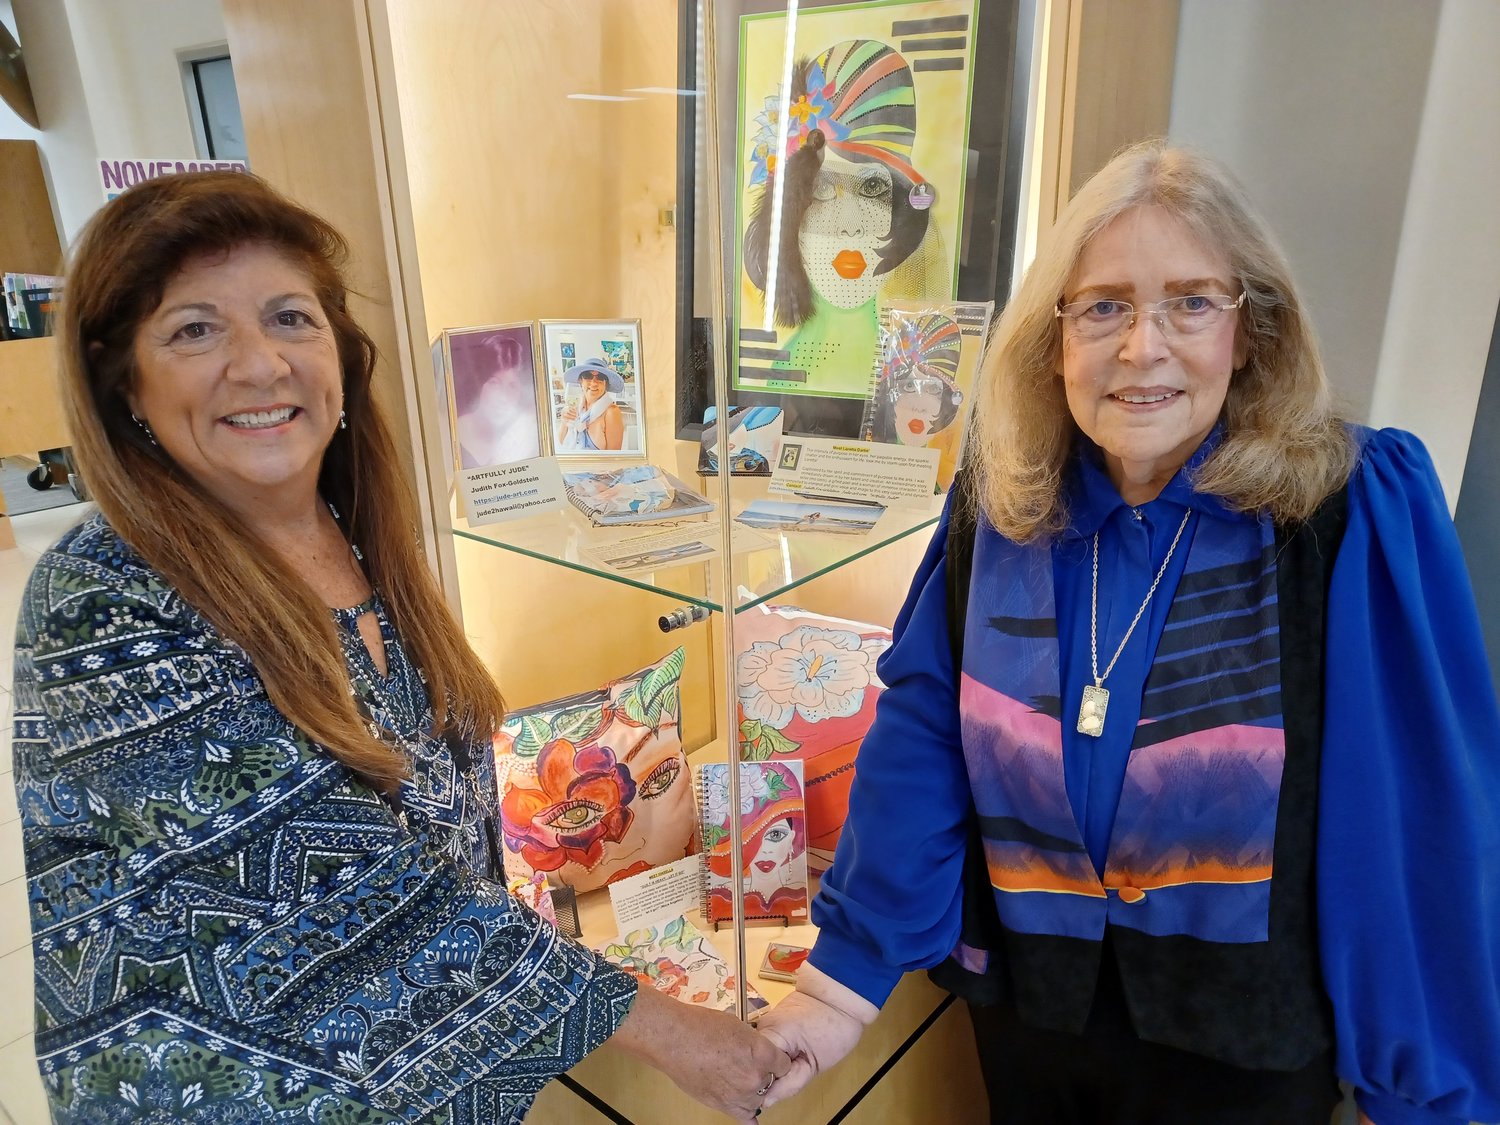 Loretta Leto, left, stands next to works of art by Judith Fox-Goldstein, right. The art is part of a PAM Jam showcase on display at the Ponte Vedra Library.